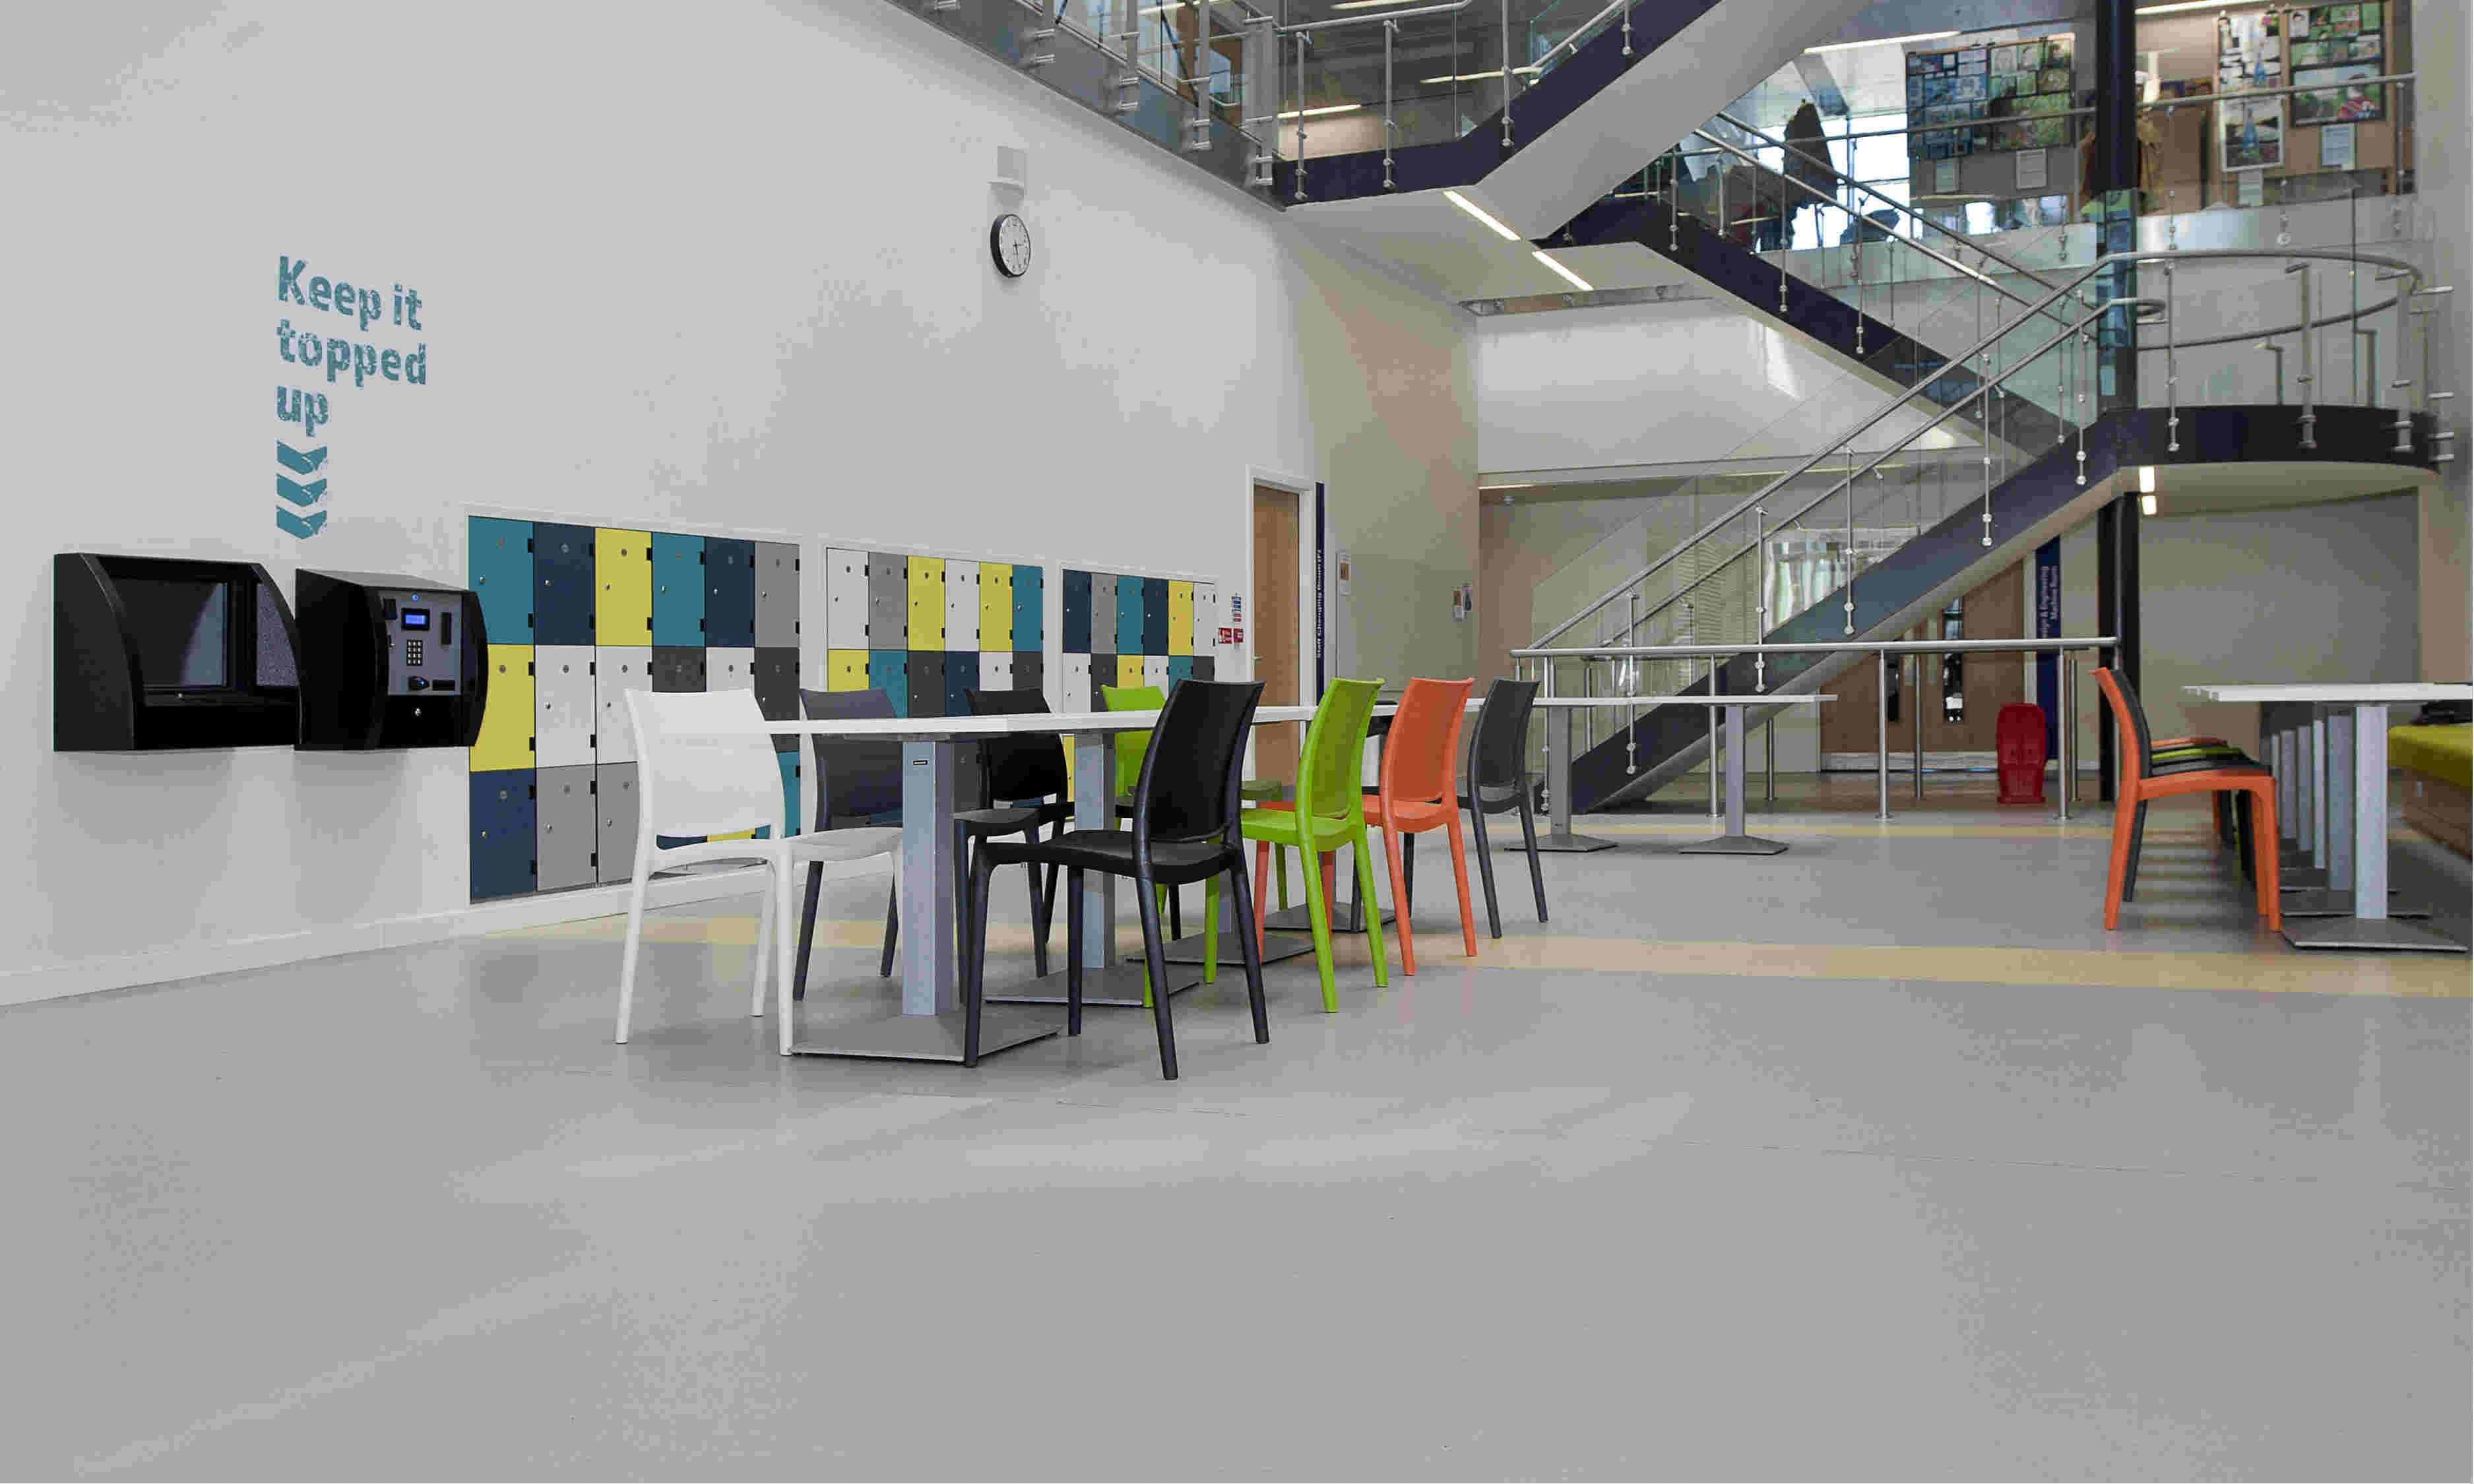 Forbo flooring helps to create a dynamic learning space for new Edinburgh school